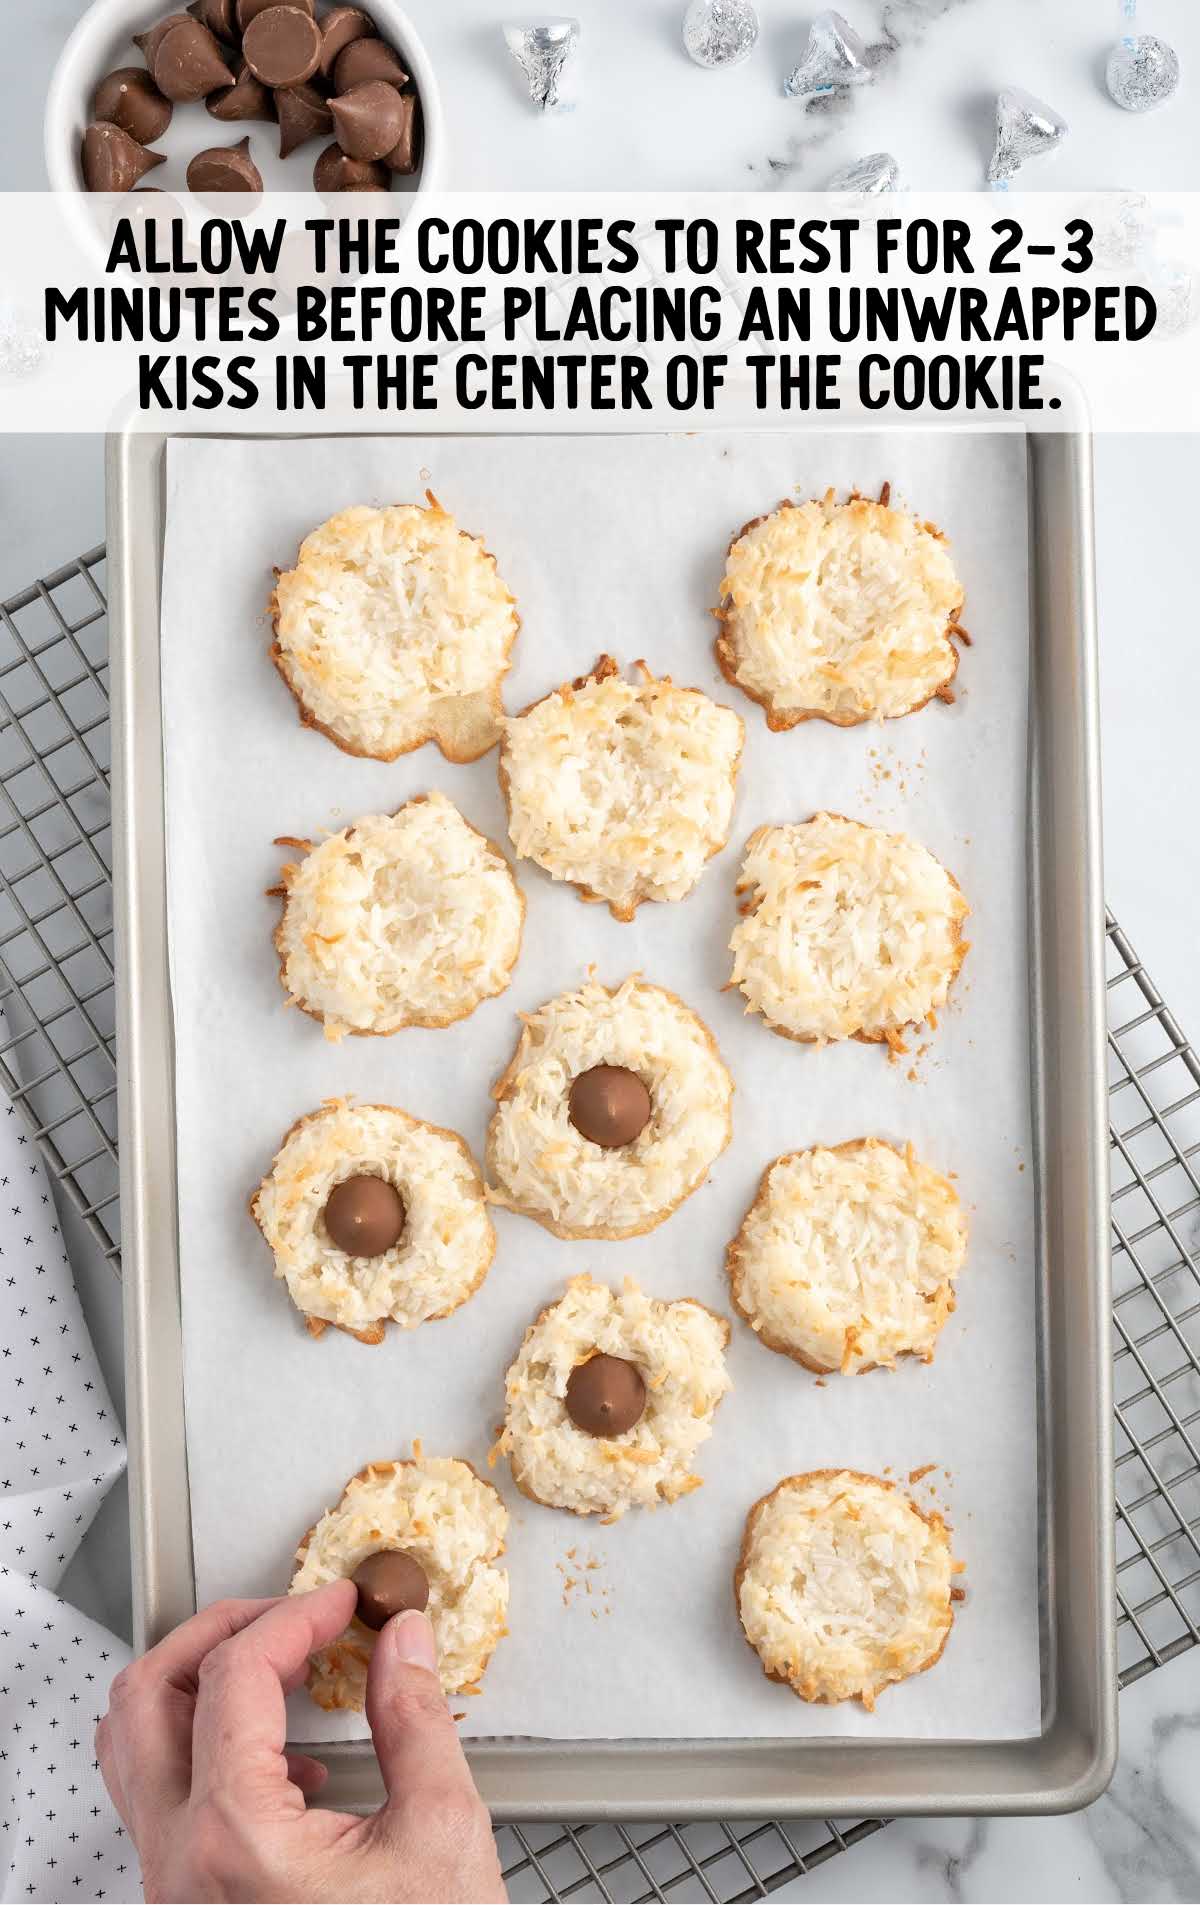 Hershey kisses placed on top of the cookies on a baking sheet